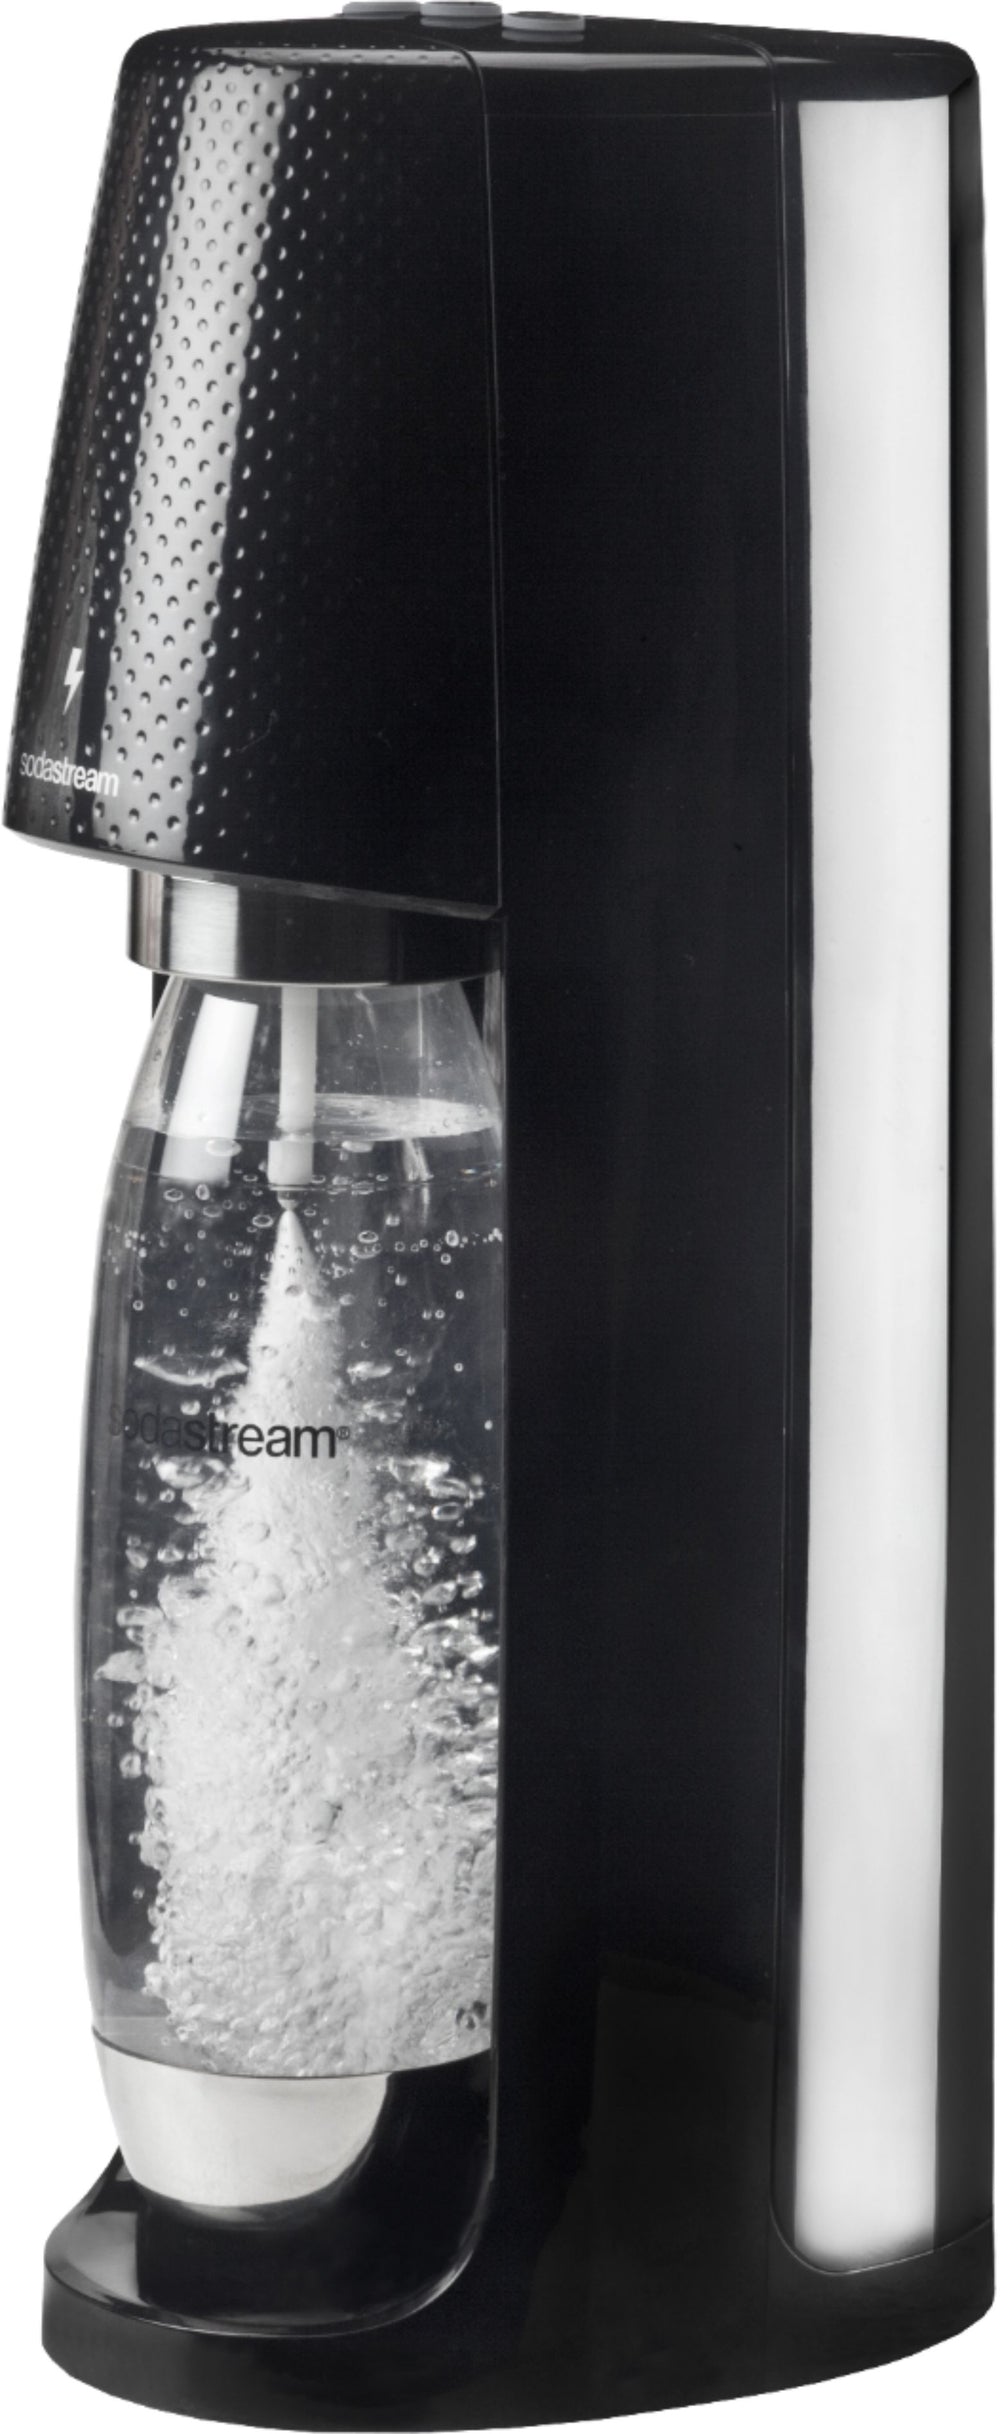 SodaStream - Fizzi One Touch Sparkling Water Maker Kit - Black_1